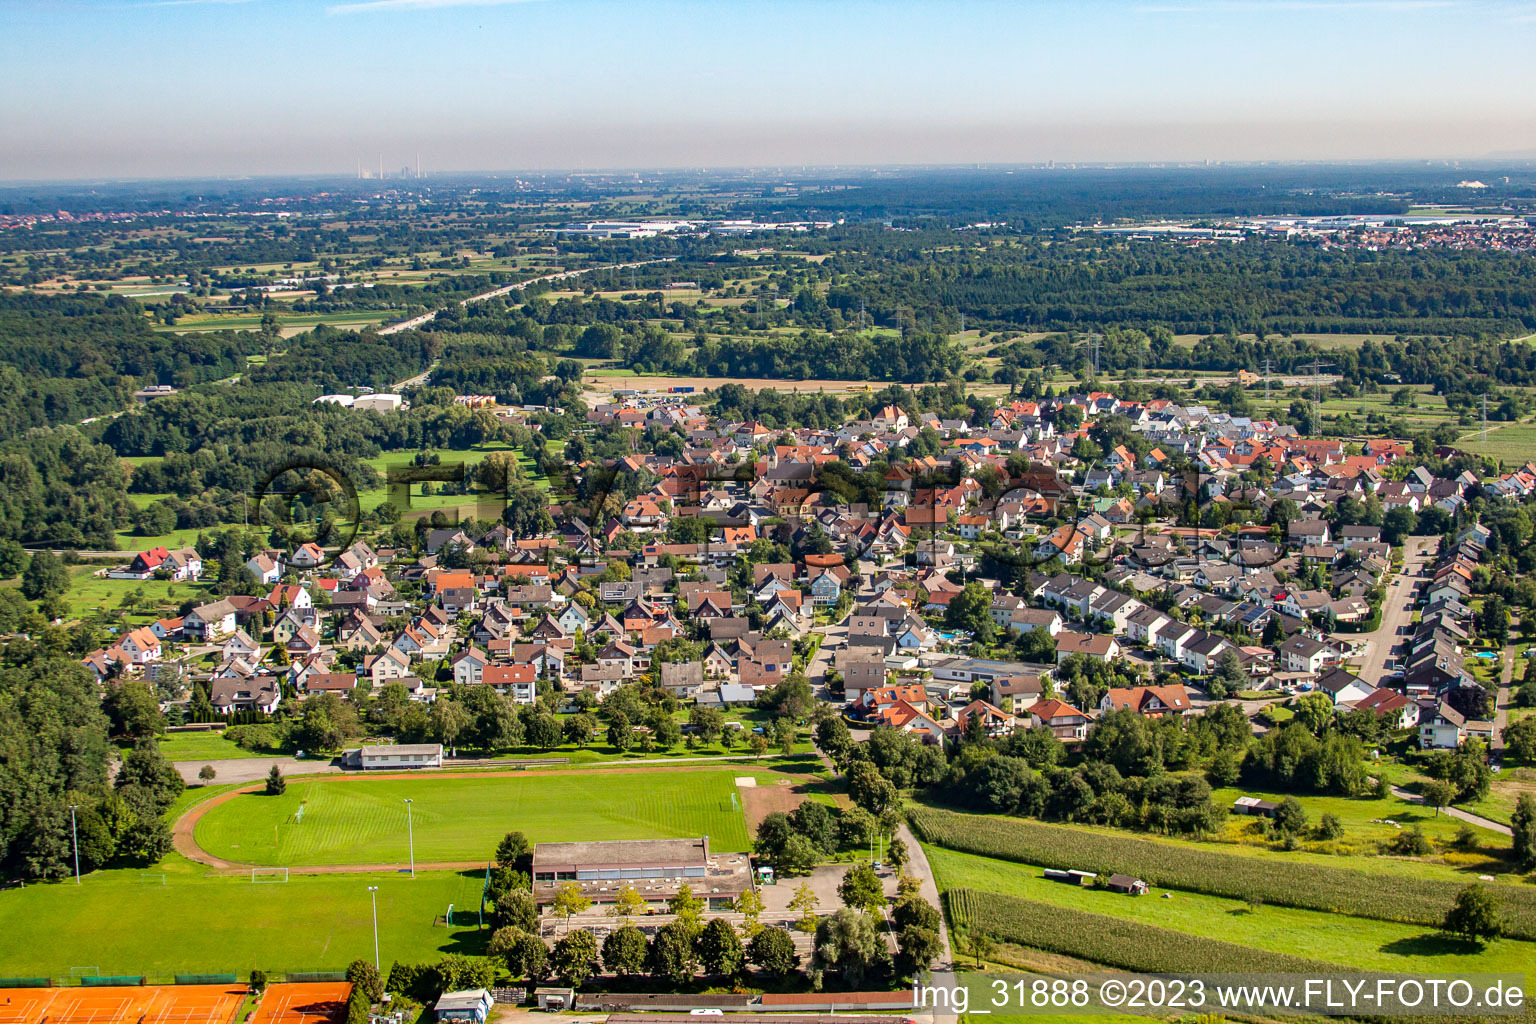 From the south in the district Rauental in Rastatt in the state Baden-Wuerttemberg, Germany